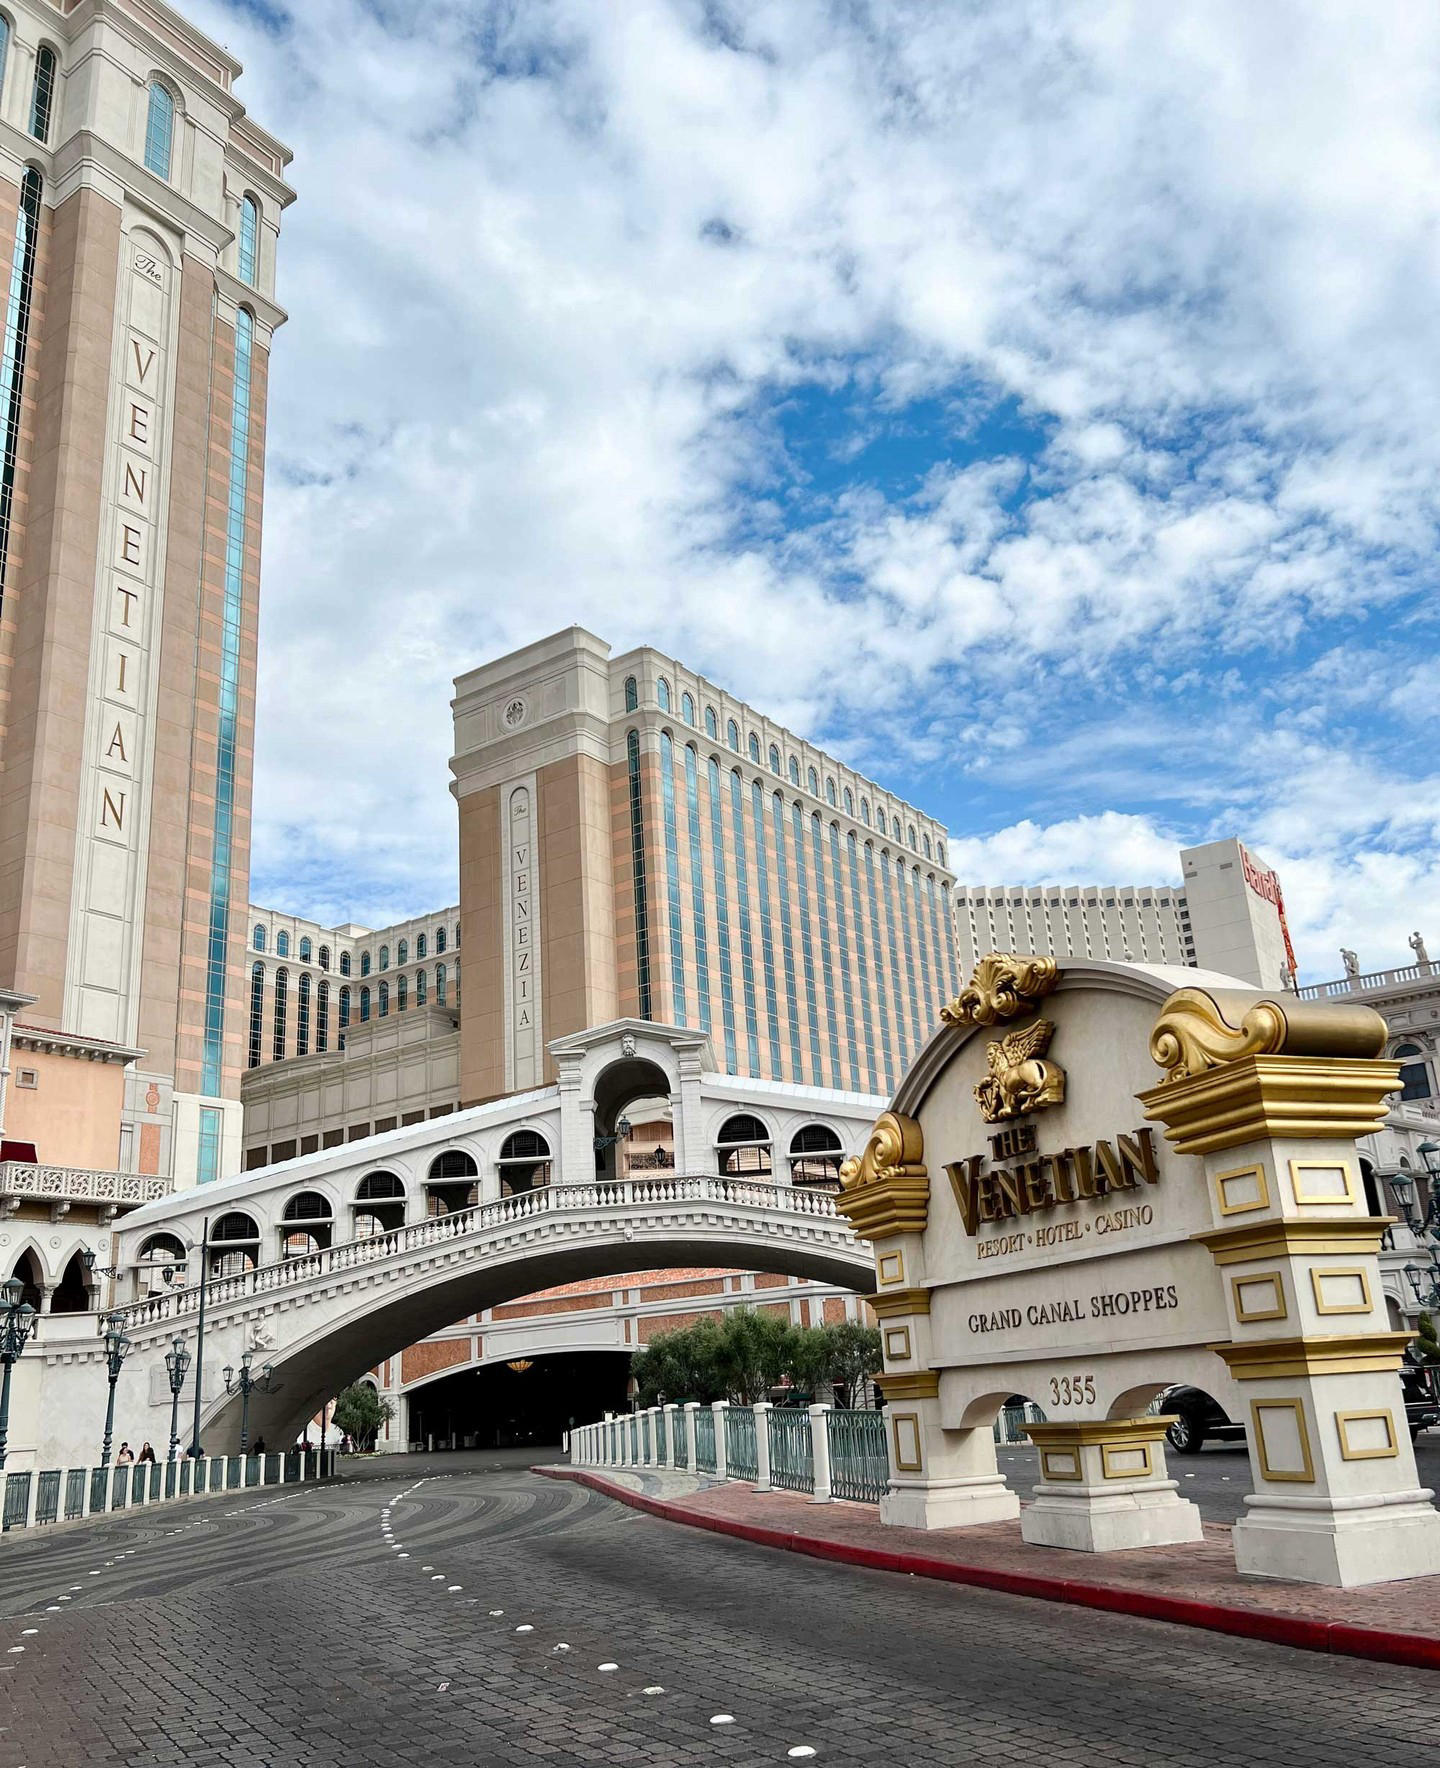 The Venetian Las Vegas - It's always a great day when you arrive at The Venetian Resort